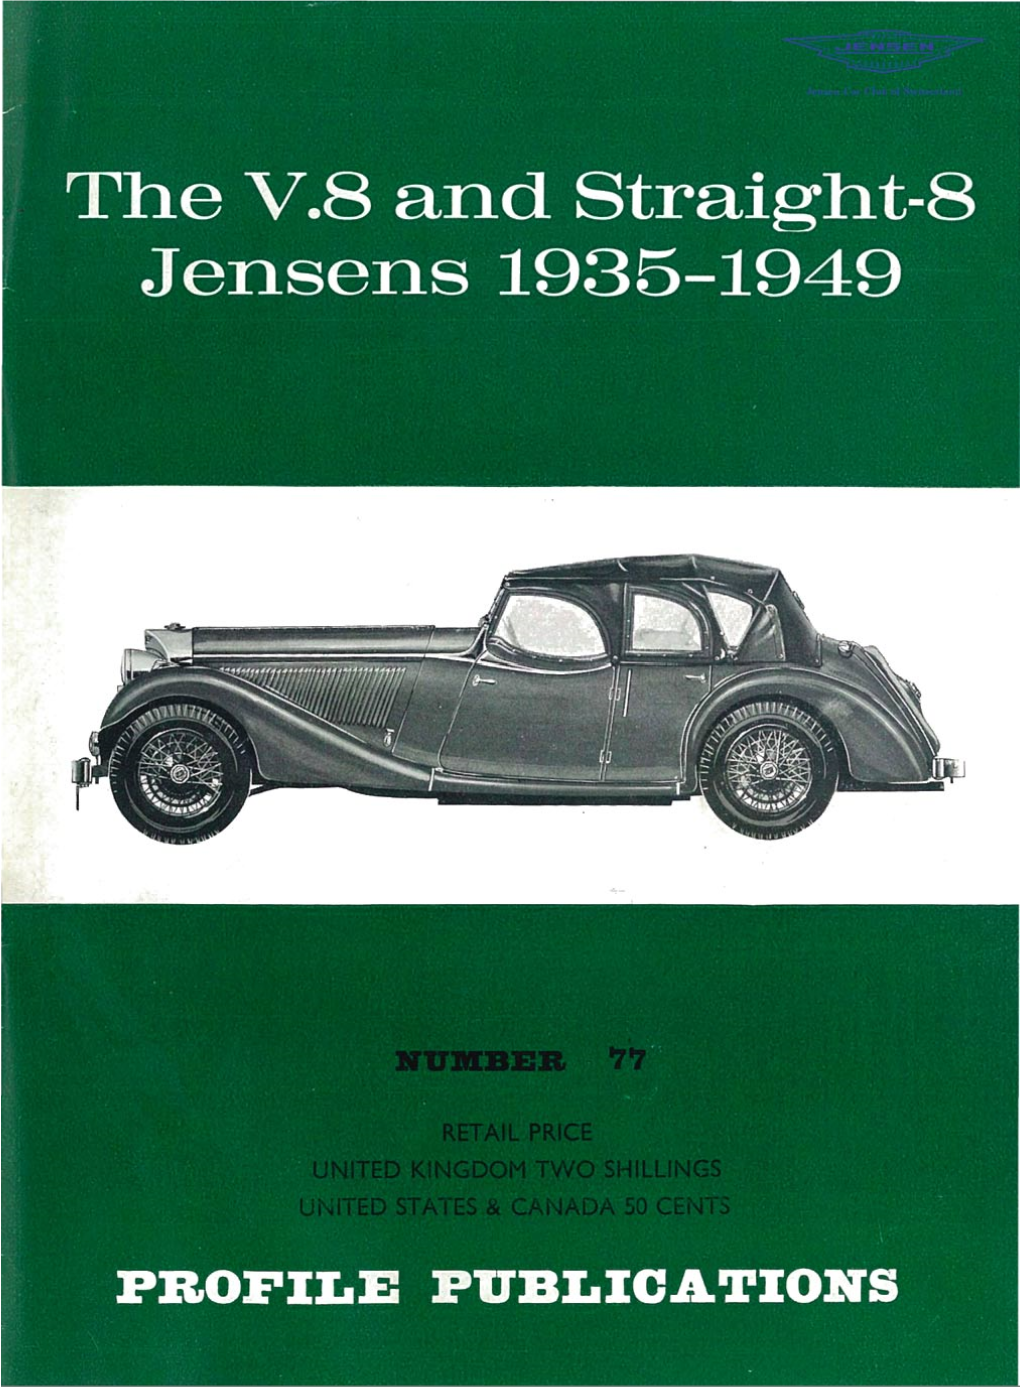 Thev.8 and Straight-8 Jensens 1935-1949 a Very Good-Looking 2-Door Sporting Saloon on the 4I-Litre Straight-Eight Cylinder Chassis Of1939